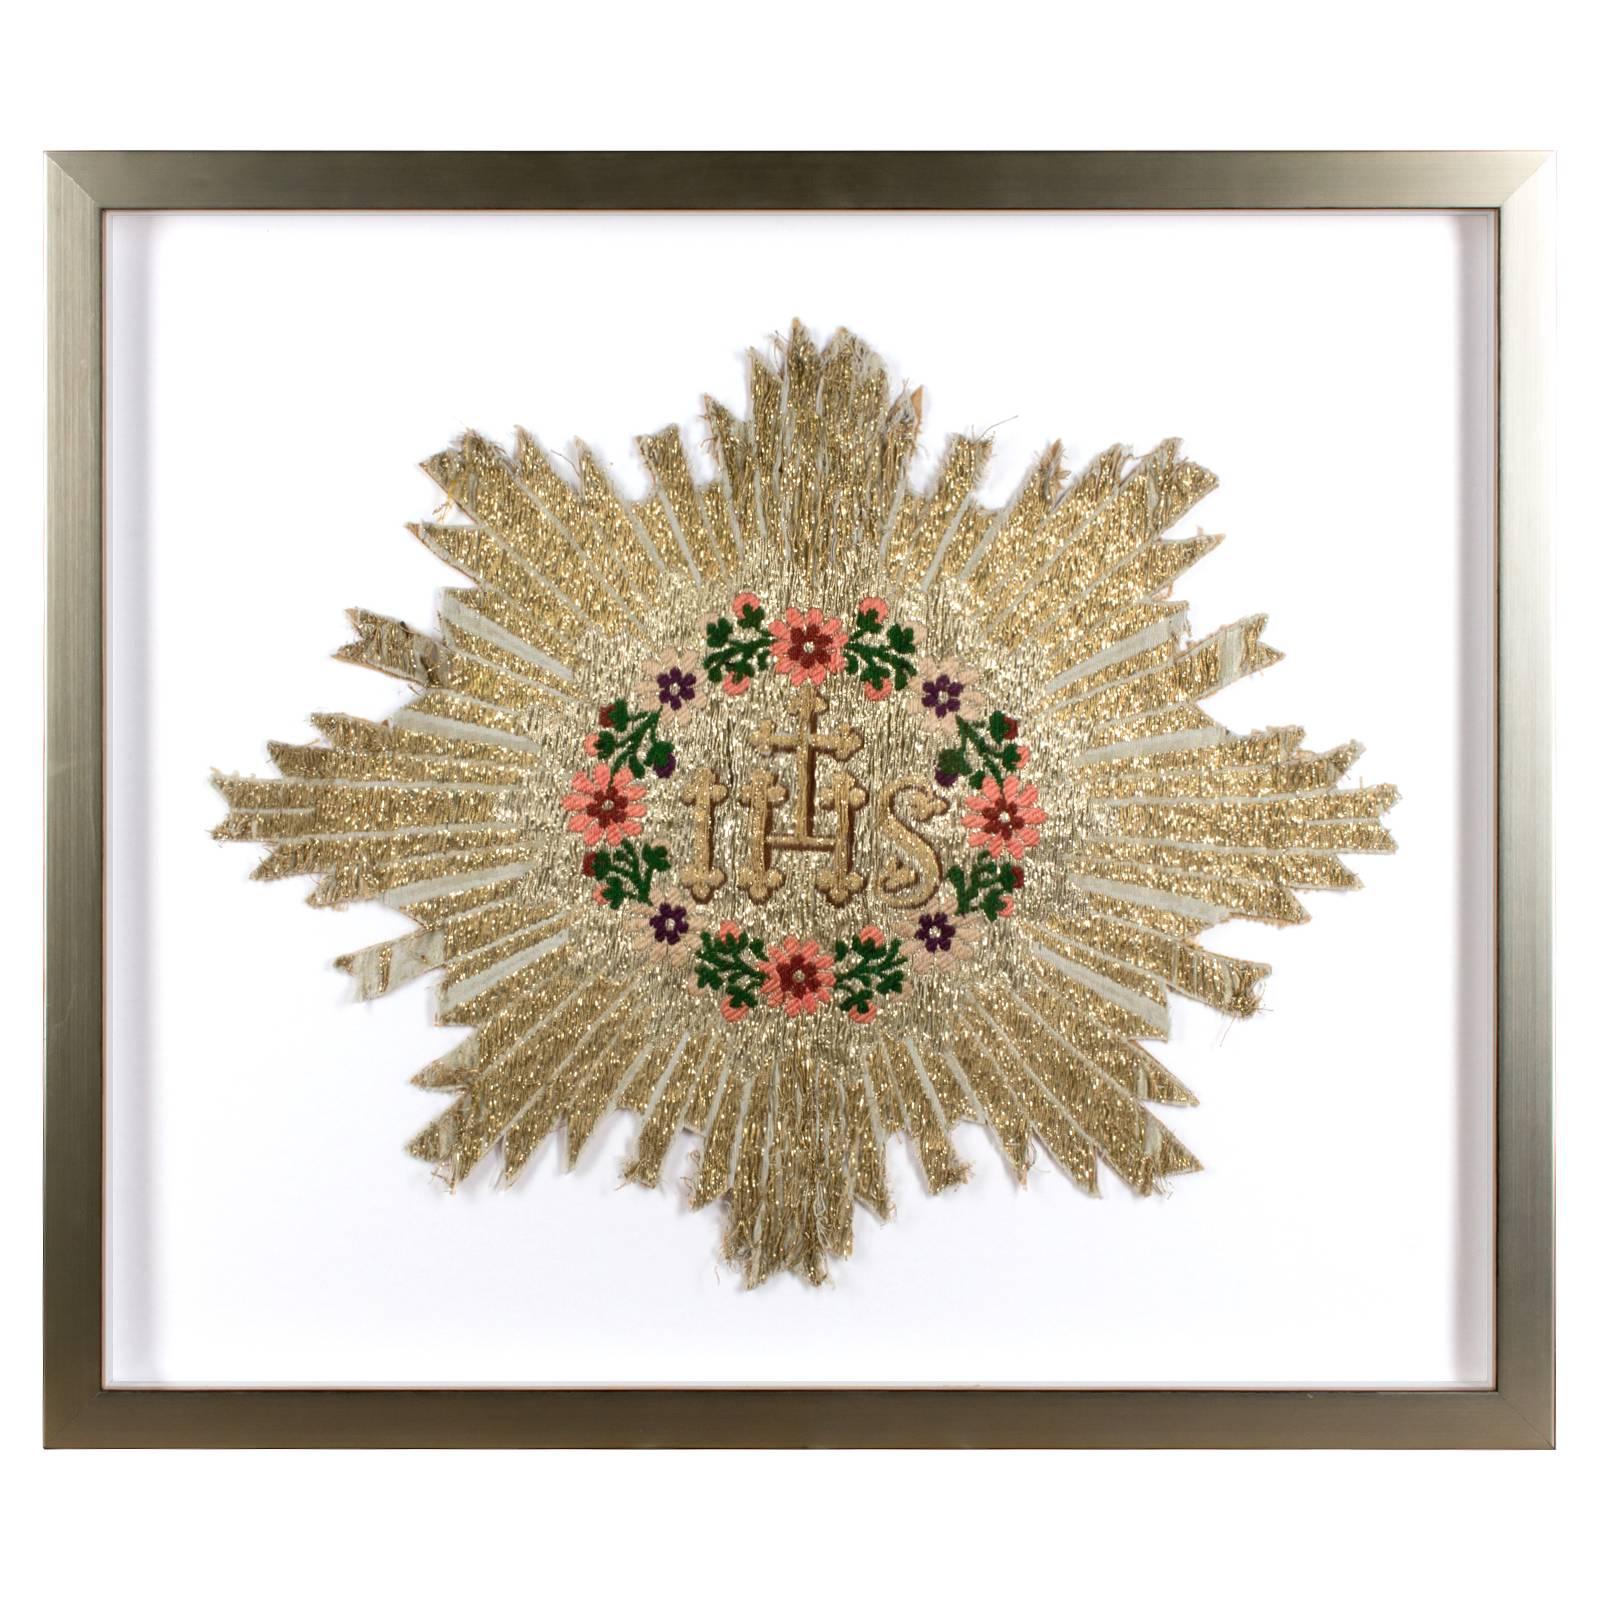 Framed Antique Embroidered Religious Textile Fragment Found in France